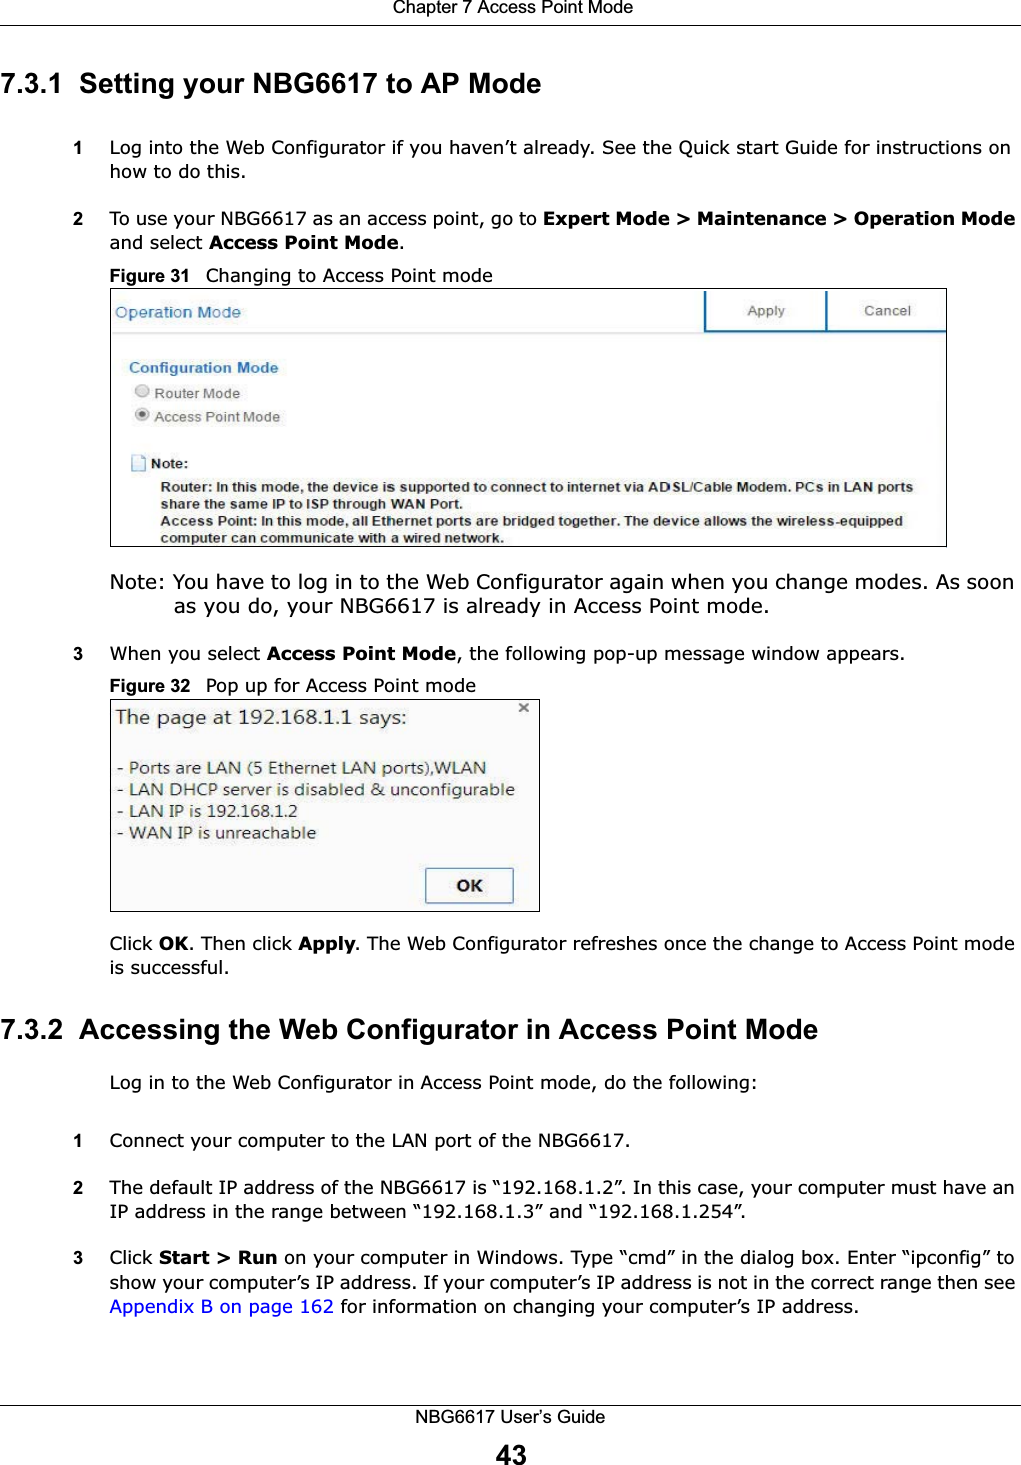  Chapter 7 Access Point ModeNBG6617 User’s Guide437.3.1  Setting your NBG6617 to AP Mode1Log into the Web Configurator if you haven’t already. See the Quick start Guide for instructions on how to do this.2To use your NBG6617 as an access point, go to Expert Mode &gt; Maintenance &gt; Operation Mode and select Access Point Mode. Figure 31   Changing to Access Point modeNote: You have to log in to the Web Configurator again when you change modes. As soon as you do, your NBG6617 is already in Access Point mode.3When you select Access Point Mode, the following pop-up message window appears.Figure 32   Pop up for Access Point mode Click OK. Then click Apply. The Web Configurator refreshes once the change to Access Point mode is successful.7.3.2  Accessing the Web Configurator in Access Point ModeLog in to the Web Configurator in Access Point mode, do the following:1Connect your computer to the LAN port of the NBG6617. 2The default IP address of the NBG6617 is “192.168.1.2”. In this case, your computer must have an IP address in the range between “192.168.1.3” and “192.168.1.254”.3Click Start &gt; Run on your computer in Windows. Type “cmd” in the dialog box. Enter “ipconfig” to show your computer’s IP address. If your computer’s IP address is not in the correct range then see Appendix B on page 162 for information on changing your computer’s IP address.